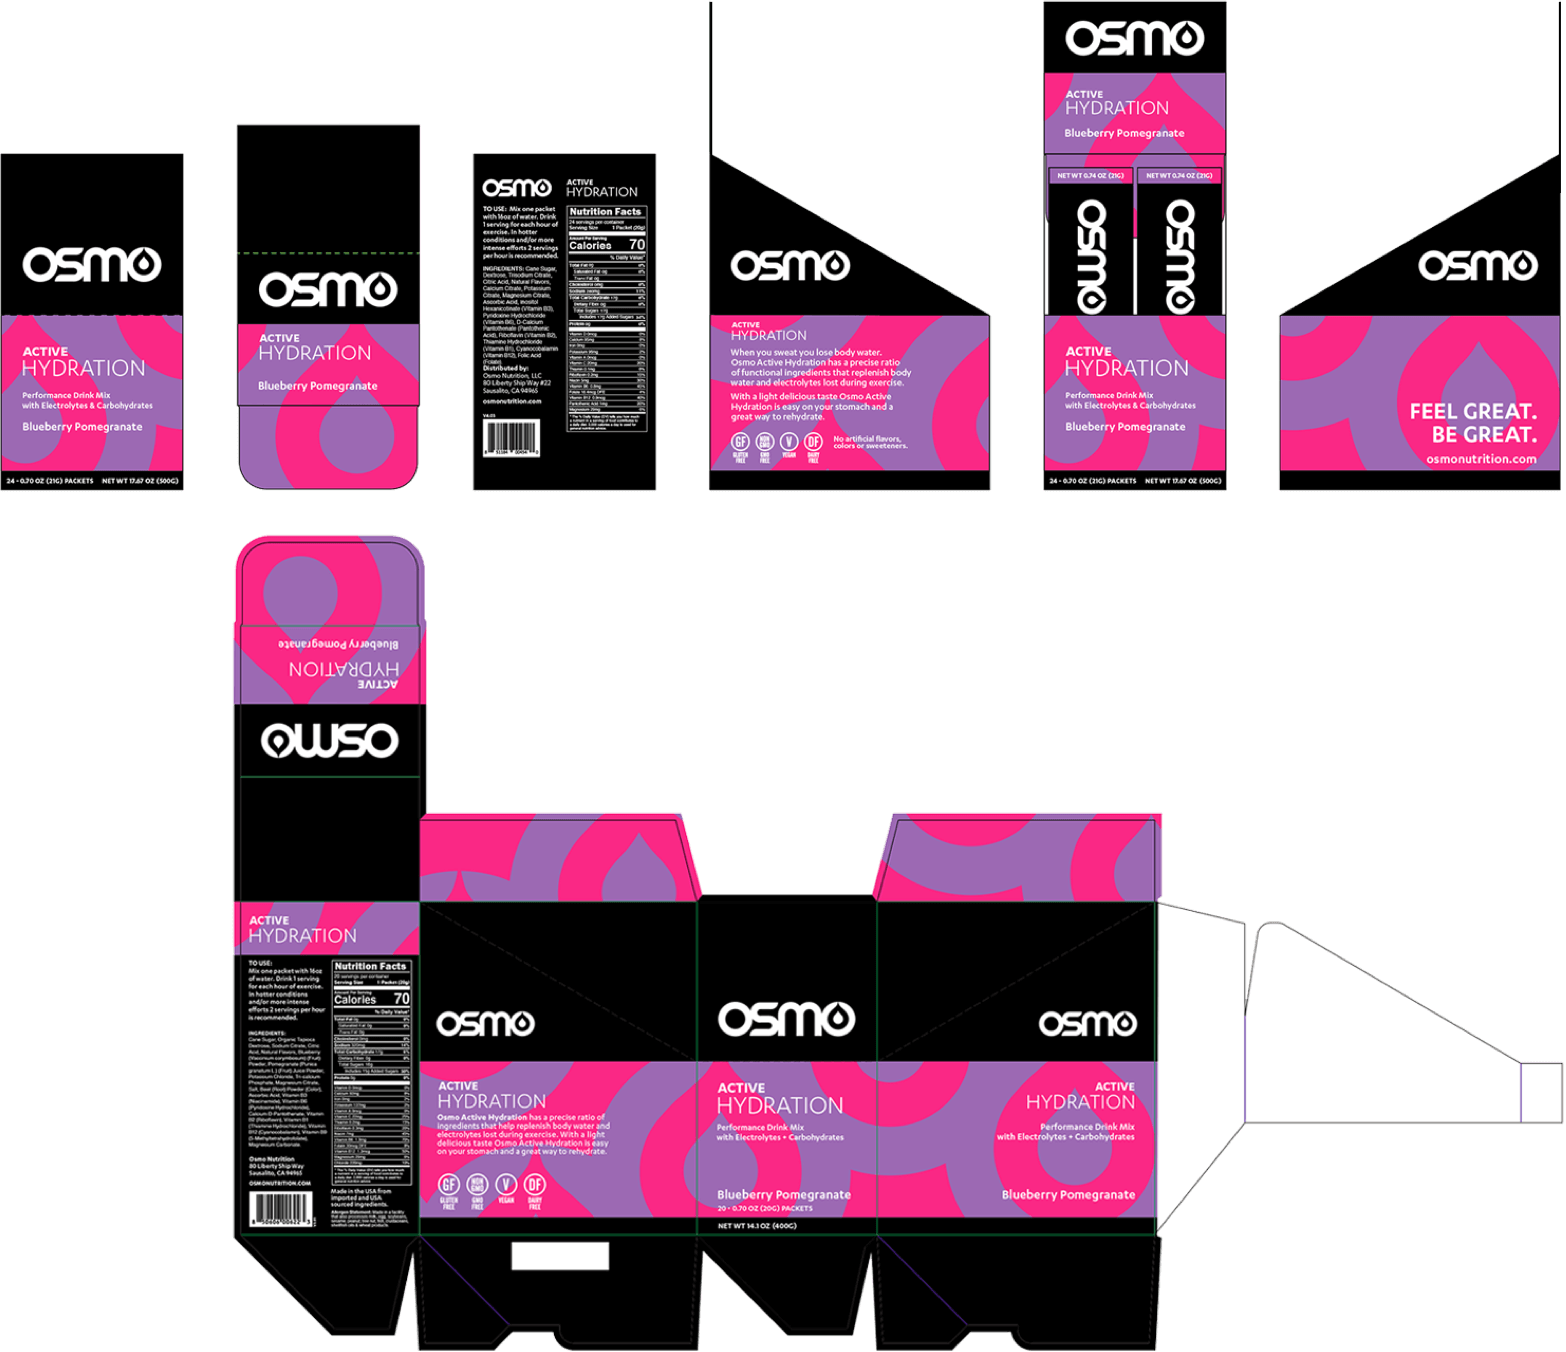 2D Osmo product packaging layout